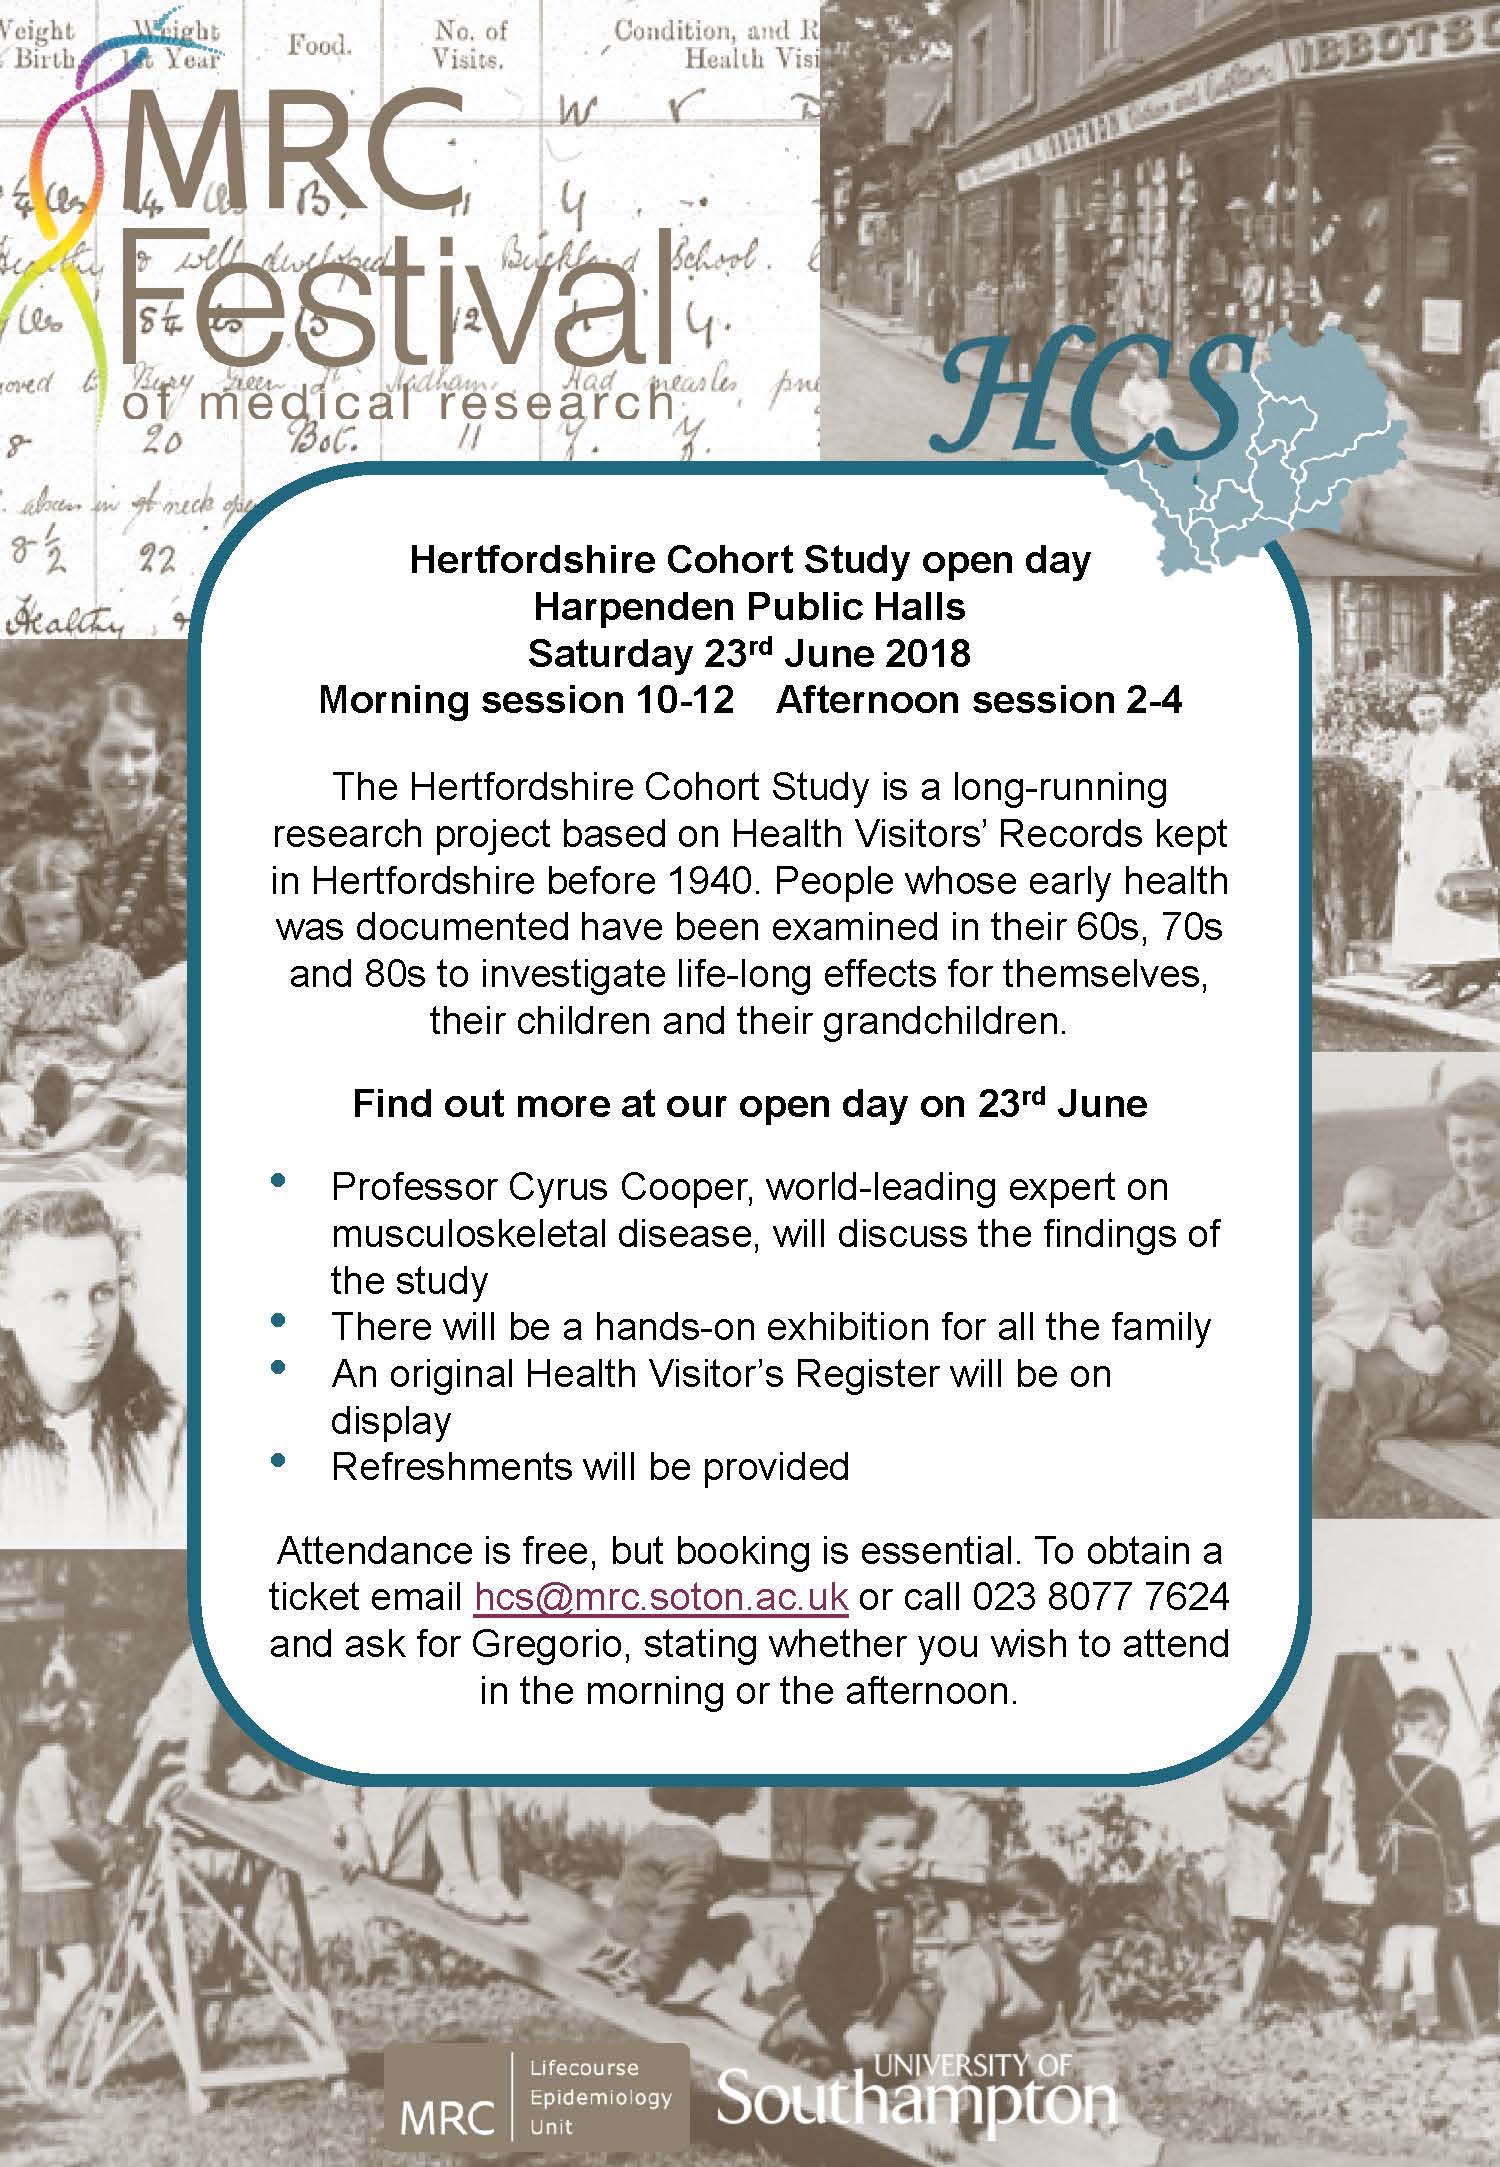 Hertfordshire Cohort Study Open Day on 23rd June 2018